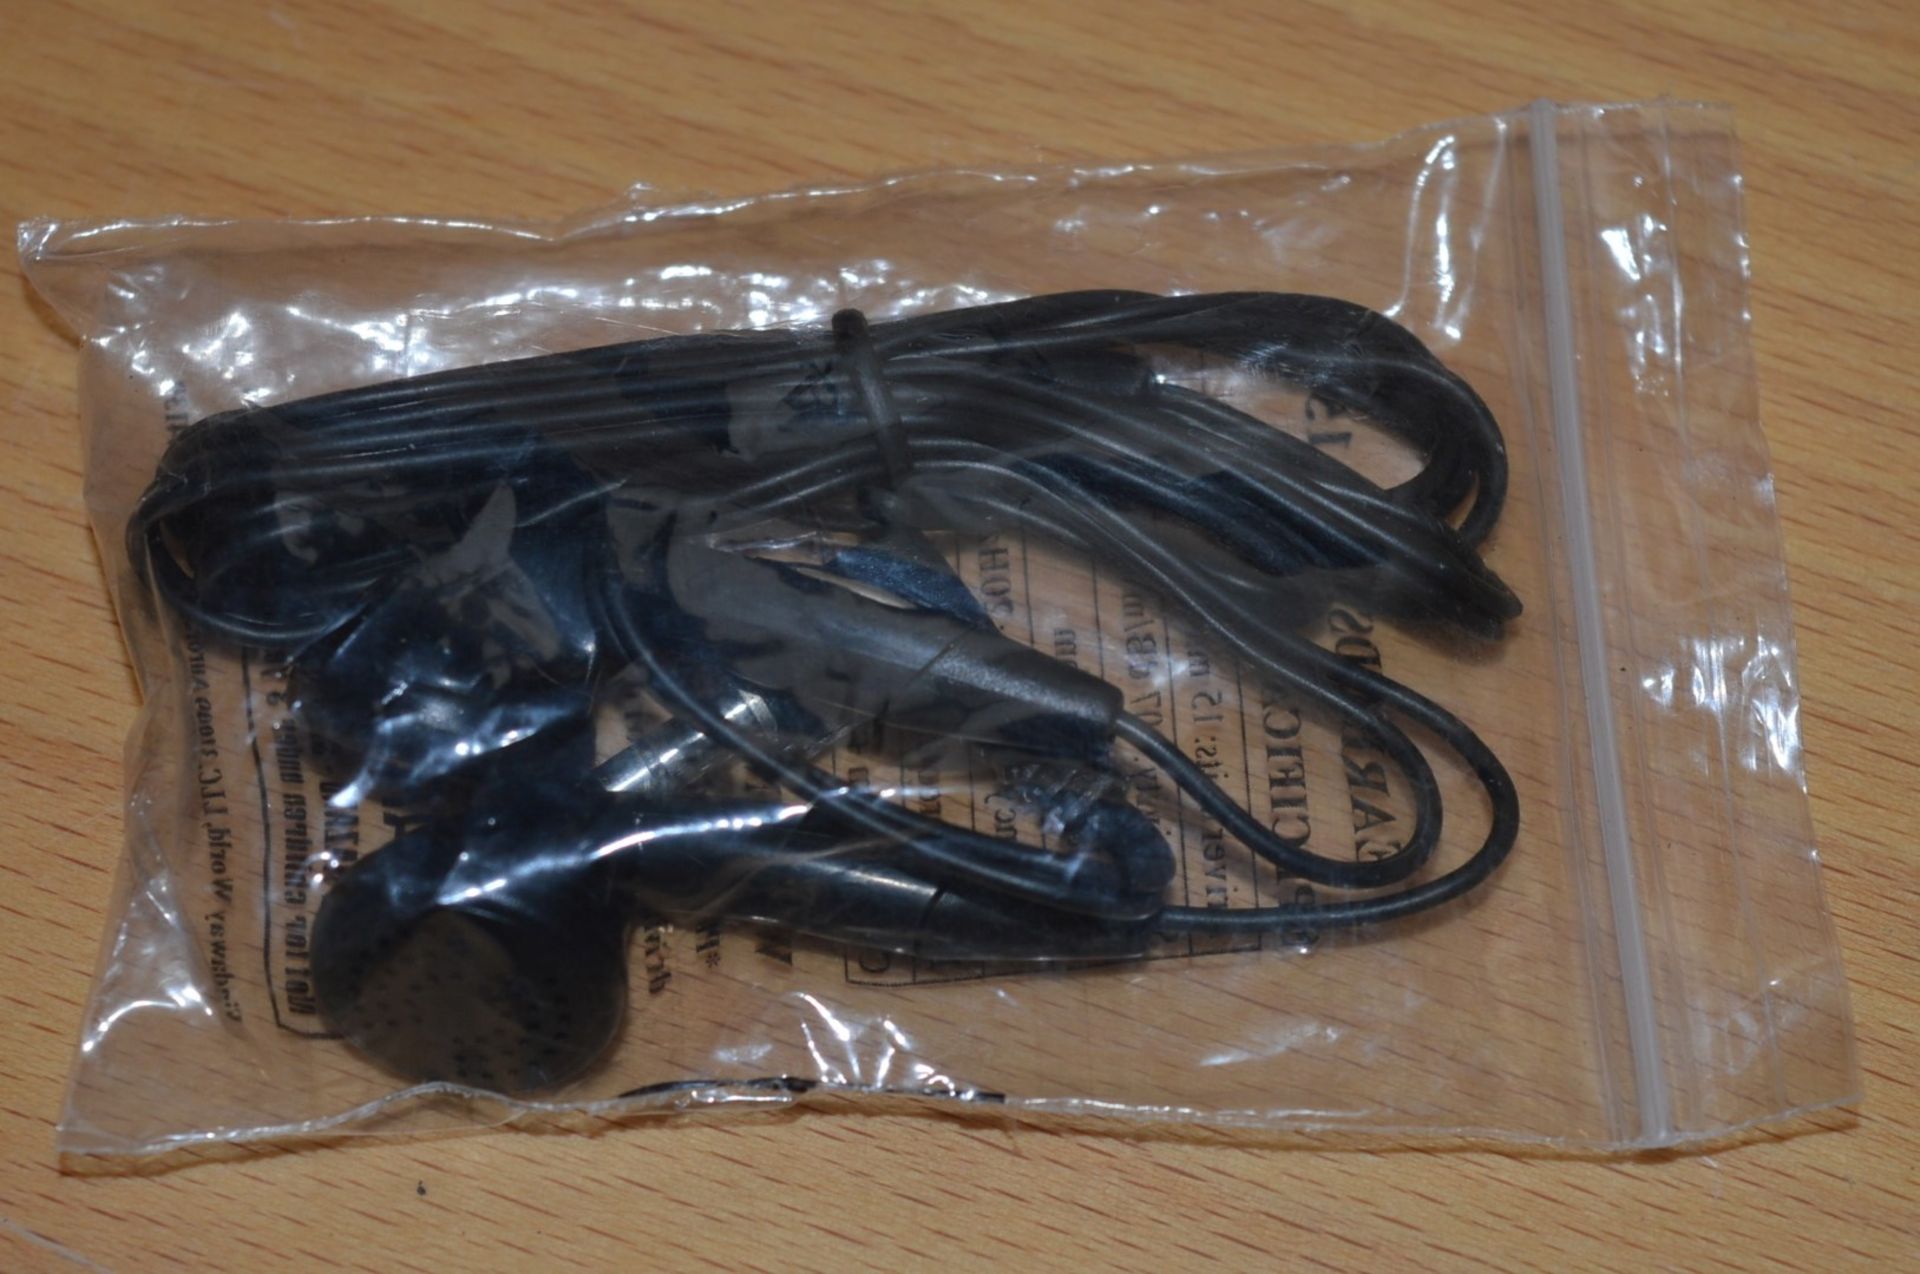 Approx 100 x Earbud Earphones - Type HL157 - 3.5mm Stereo Mini Plug - 32OHM - 107dB - New and Unused - Image 3 of 5